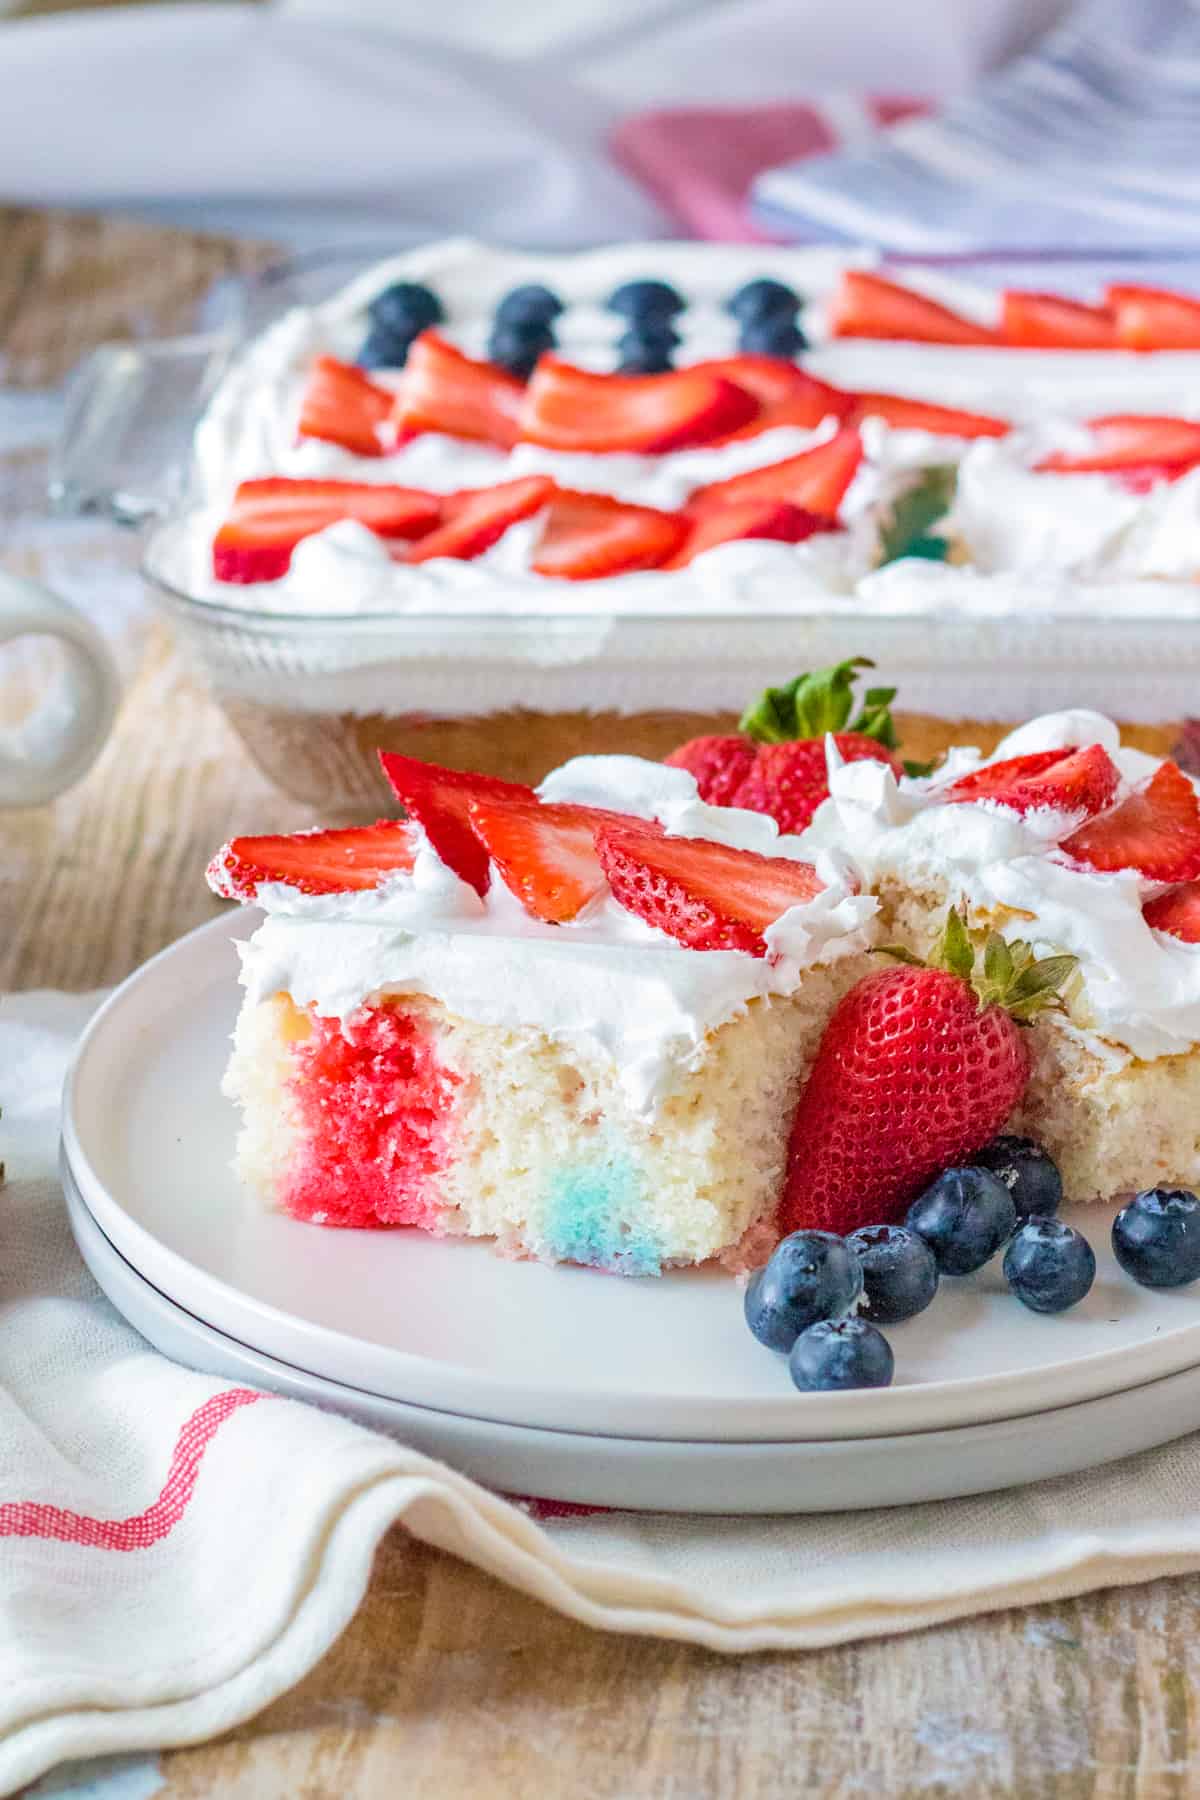 4th of July poke cake with red and blue jello, cool whip topping, and fresh berries in the shape of a flag on top.